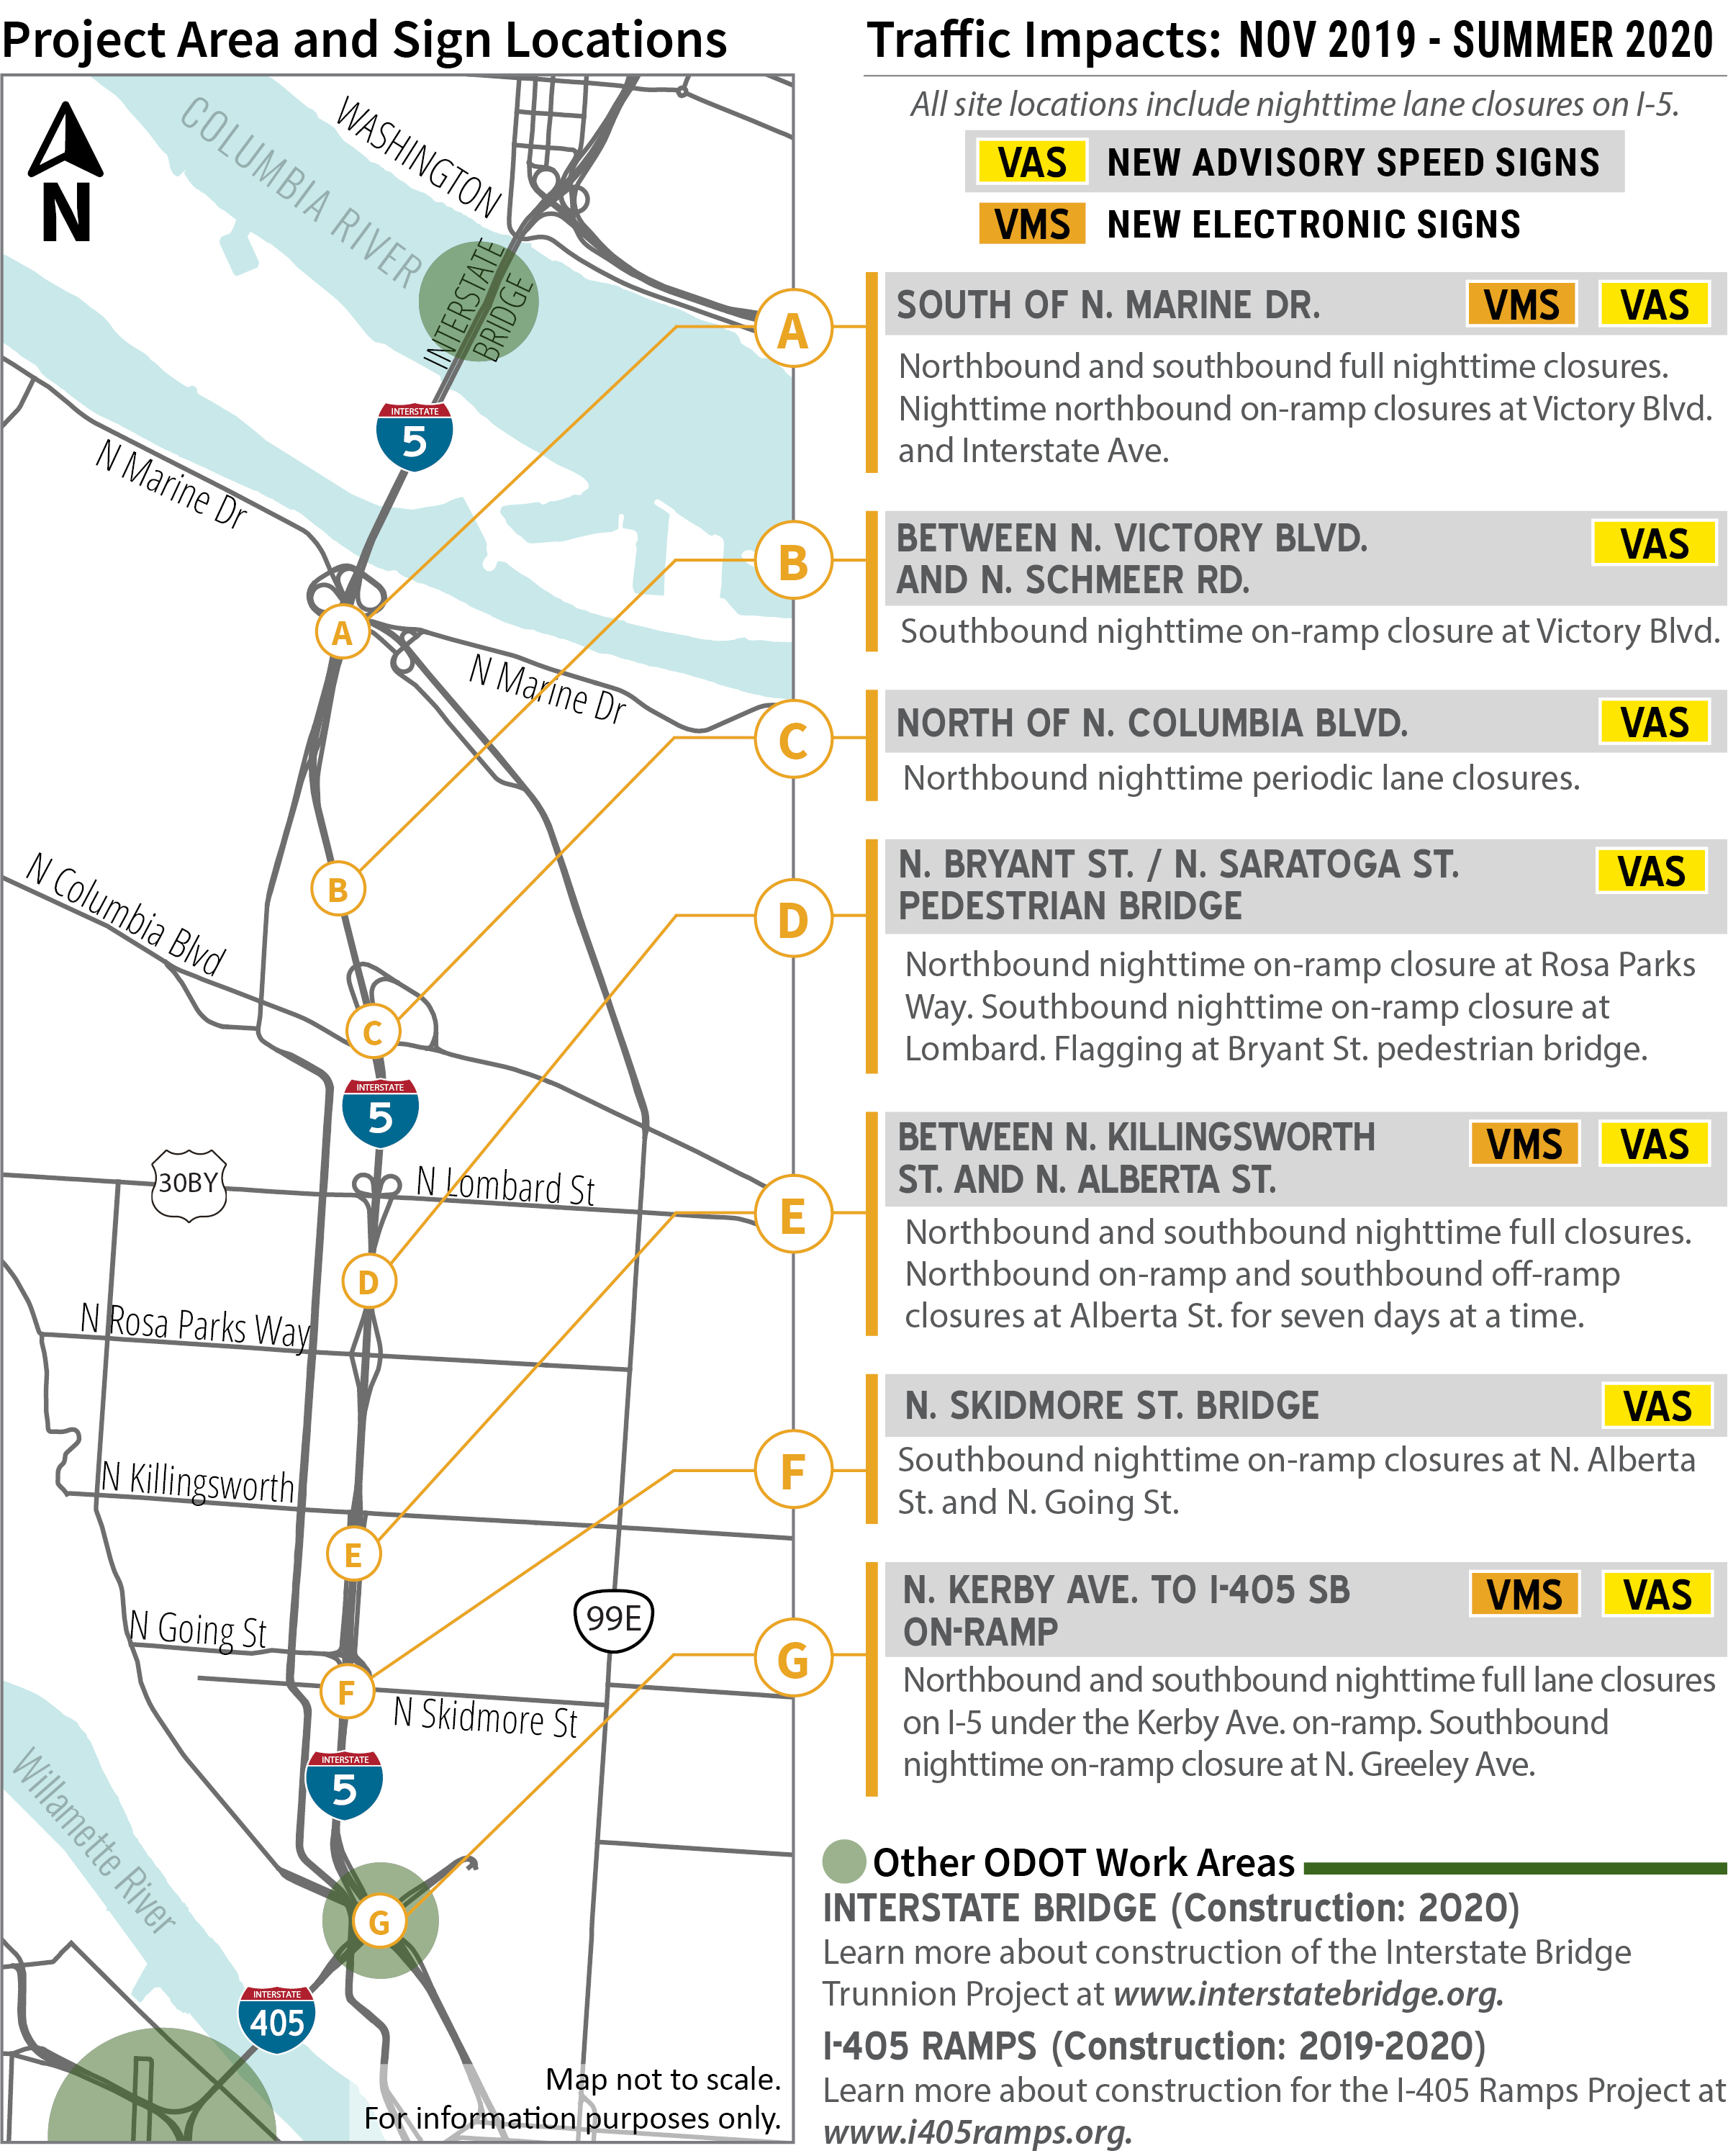     Annotated map graphic showing the project area and sign locations of seven different sites and their related traffic impacts between November 2019 and summer 2020. All site locations include nighttime lane closures on Interstate-5.  Site A: South of North Marine Drive. New electronic signs and new advisory speed signs will be installed. Site A will have northbound and southbound full nighttime closures. Nighttime northbound on-ramp closures at Victory Boulevard and Interstate Avenue.  Site B: Between North Victory Boulevard and North Schmeer Road. New advisory speed signs will be installed. Site B will have a southbound nighttime on-ramp closure at Victory Boulevard.  Site C: North of North Columbia Boulevard. New advisory speed signs will be installed. Site C will have northbound nighttime periodic lane closures.  Site D: North Bryant Street / North Saratoga Street. Pedestrian Bridge. New advisory speed signs will be installed. Site D. will have northbound nighttime on-ramp closure at Rosa Parks Way; southbound nighttime on-ramp closure at Lombard; and flagging at Bryant Street pedestrian bridge.  Site E: Between North Killingsworth Street and North Alberta Street. New electronic signs and new advisory speed signs will be installed. Site E will have northbound and southbound nighttime full closures; northbound on-ramp and southbound off-ramp closures at Alberta Street for seven days at a time.  Site F: North Skidmore Street Bridge. New advisory speed signs will be installed. Site F will have southbound nighttime on-ramp closures at North Alberta Street and North Going Street.  Site G: North Kerby Avenue to Interstate-405 Southbound on-ramp. New electronic signs and new advisory speed signs will be installed. Site G will have northbound and southbound nighttime full lane closures on Interstate-5 under the Kerby Avenue on-ramp; and a southbound nighttime on-ramp closure at North Greeley Avenue.  There are two nearby ODOT projects that may impact traffic along Interstate-5. These work areas include the Interstate Bridge project and the Interstate-405 Ramps project.  Construction for the Interstate Bridge project is expected to start in 2020. Learn more about construction of the Interstate Bridge Trunnion Project at www.interstatebridge.org.  Construction for the Interstate-405 Ramps project will take place between 2019 and 2020. Learn more about construction for the I-405 Ramps Project at www.i405ramps.org.  The annotated map graphic showing the project area (as described above) is not drawn to scale and is for information purposes only.    